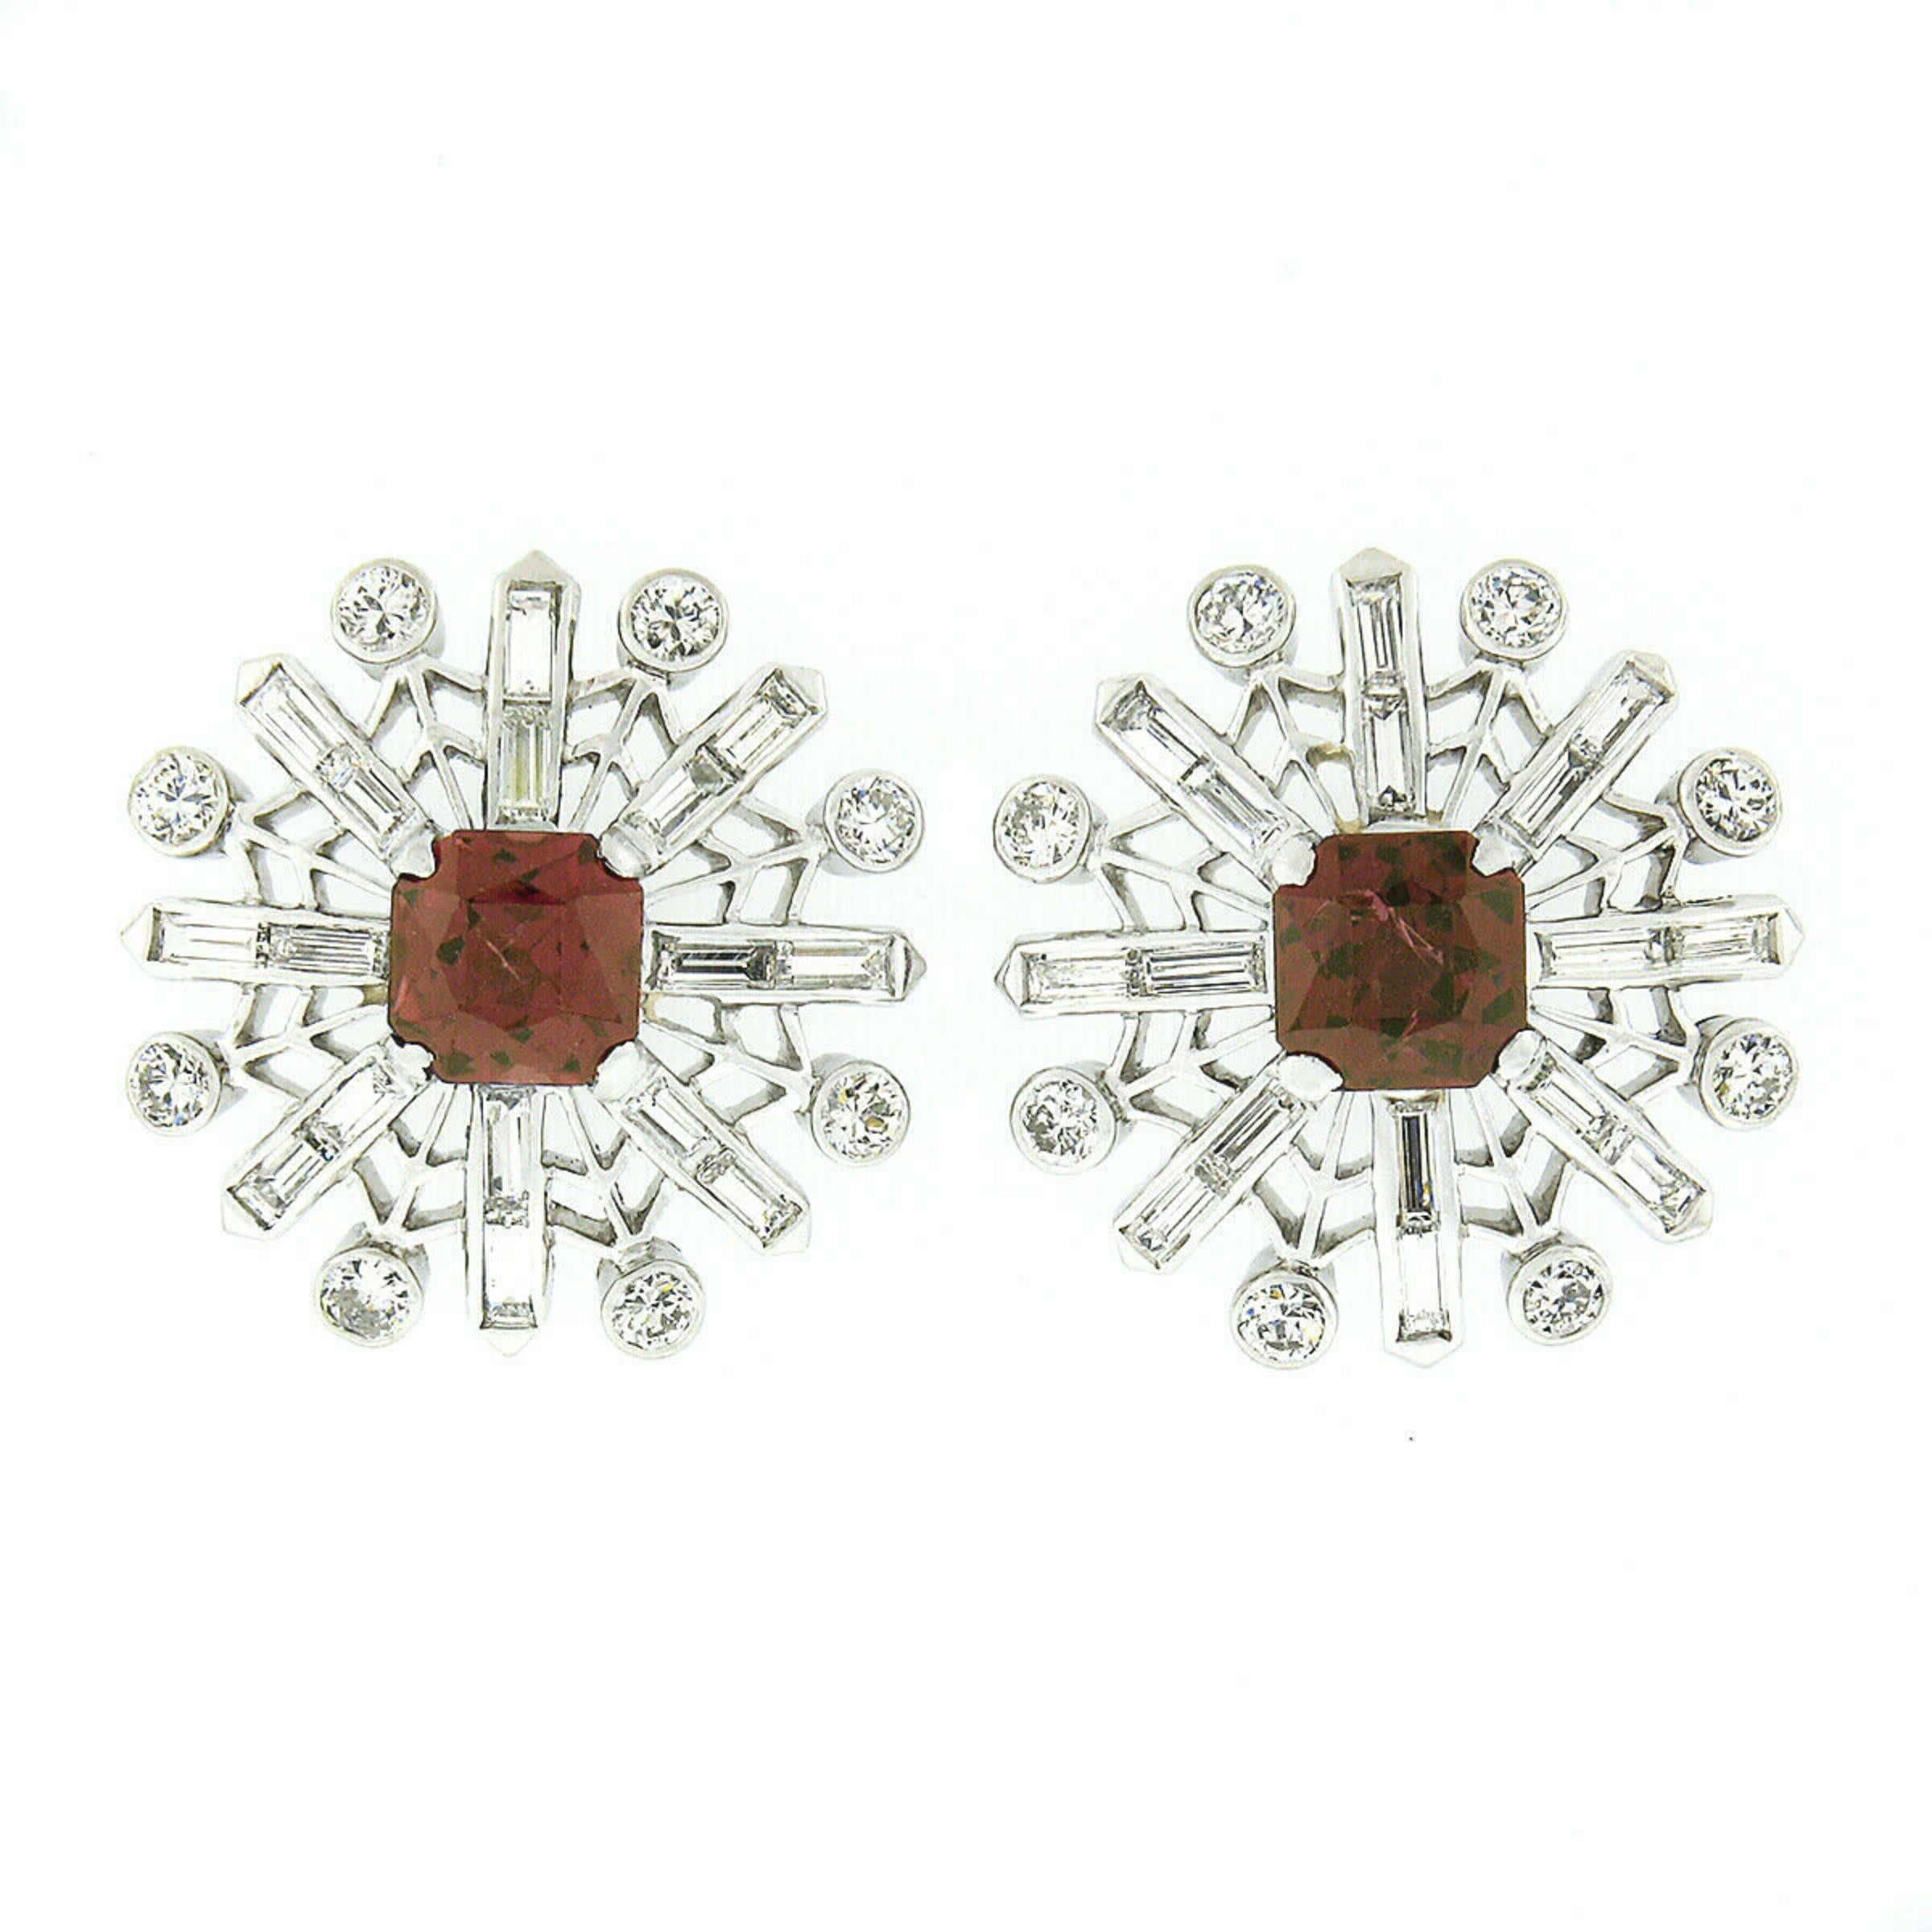 Here we have a stunning pair of vintage stud earrings that feature a lovely snowflake design crafted from solid platinum. Each earring is neatly set with a radiant cut rhodolite garnet at its center, standing out with its truly gorgeous purplish-red